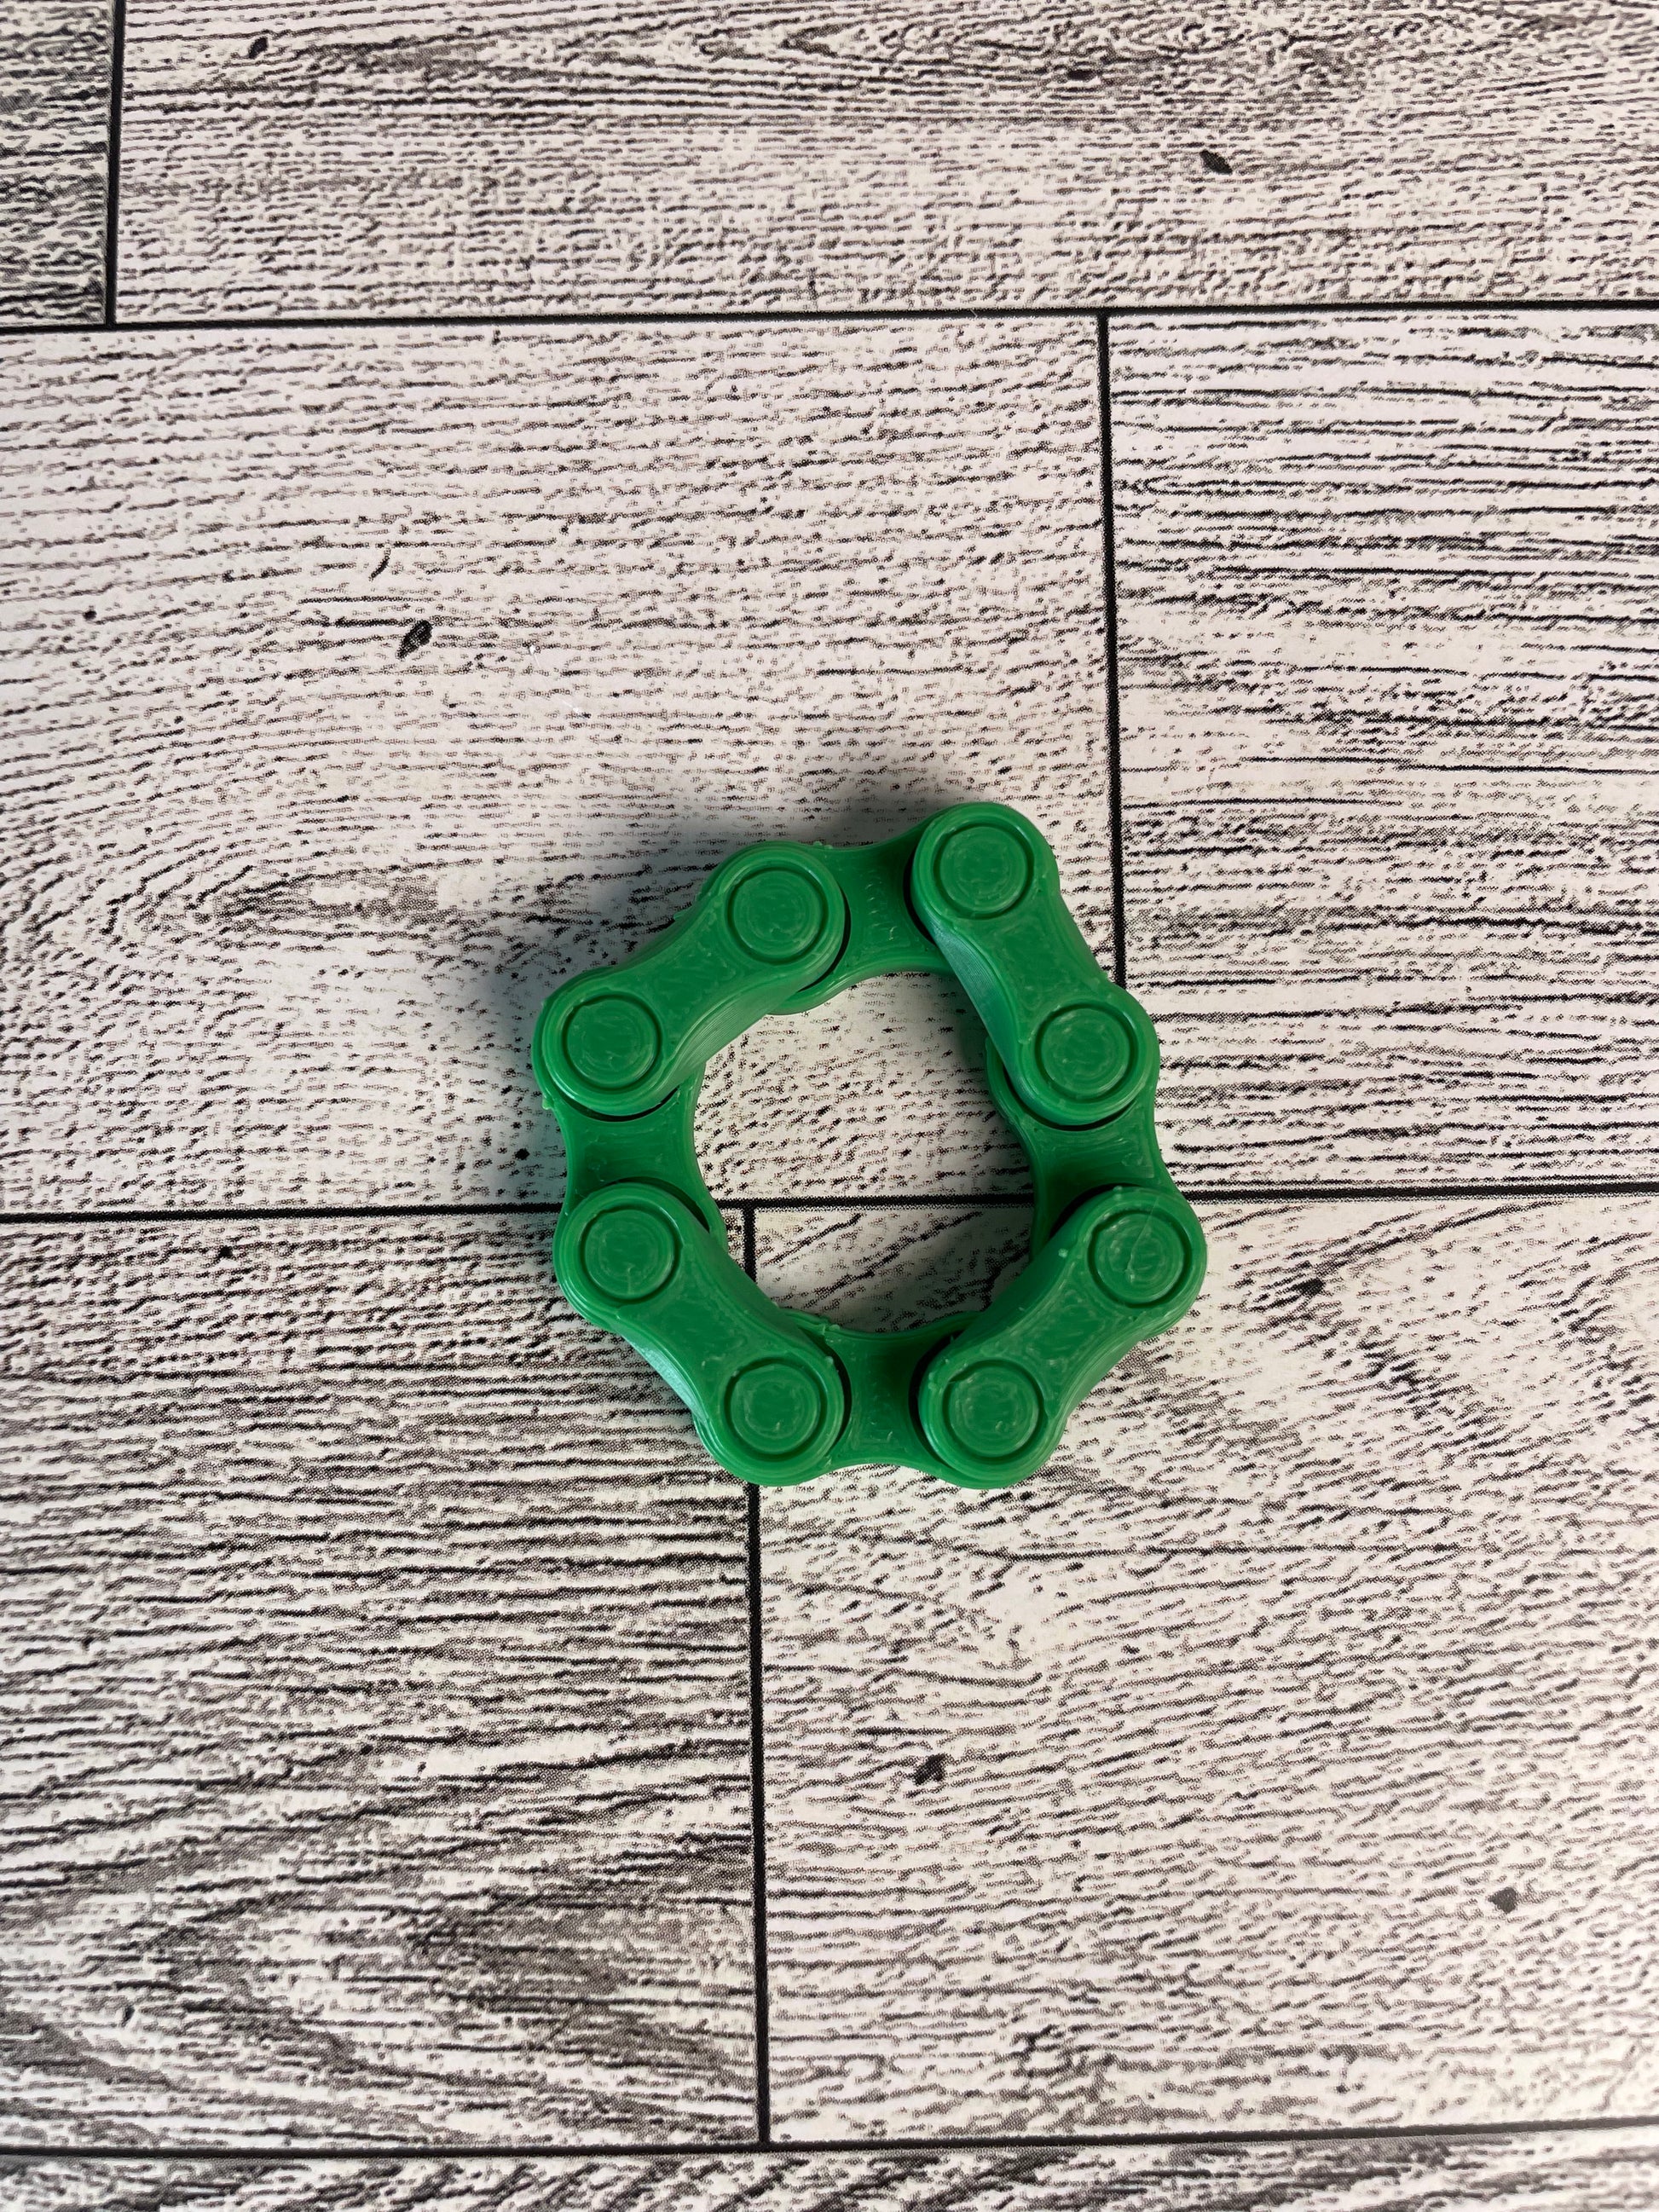 A green chain link on a wood backdrop. The chain is arranged in a circle shape and there are four links.